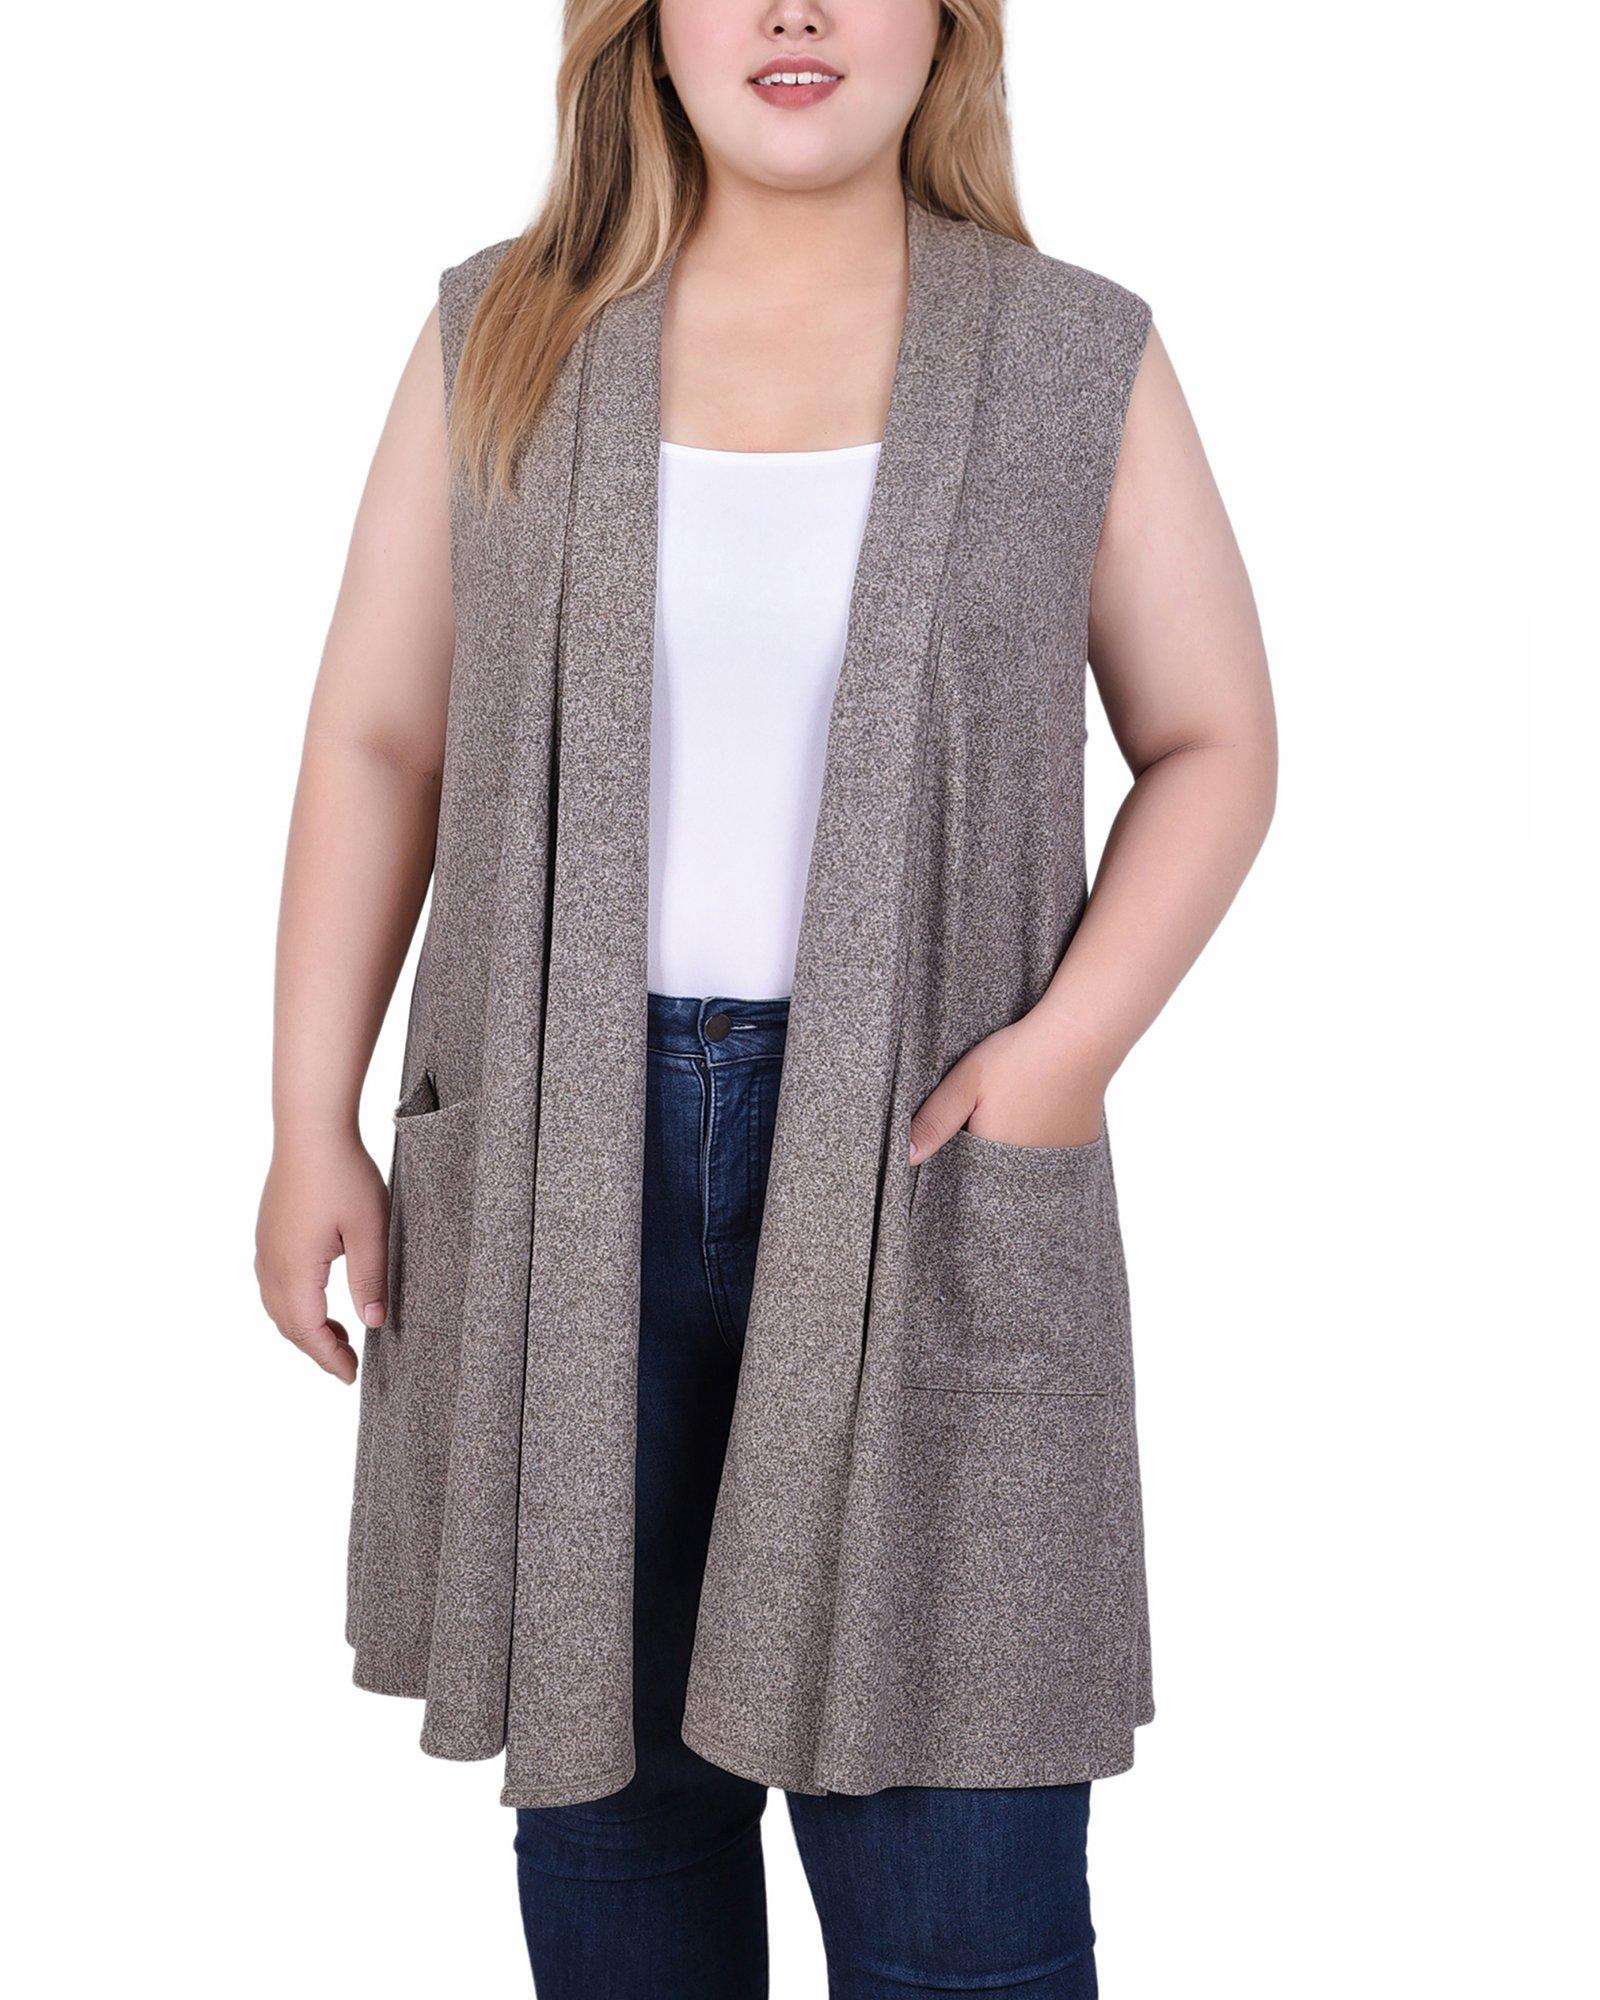 NY Collection Womens Long Sleeveless Knit Vest